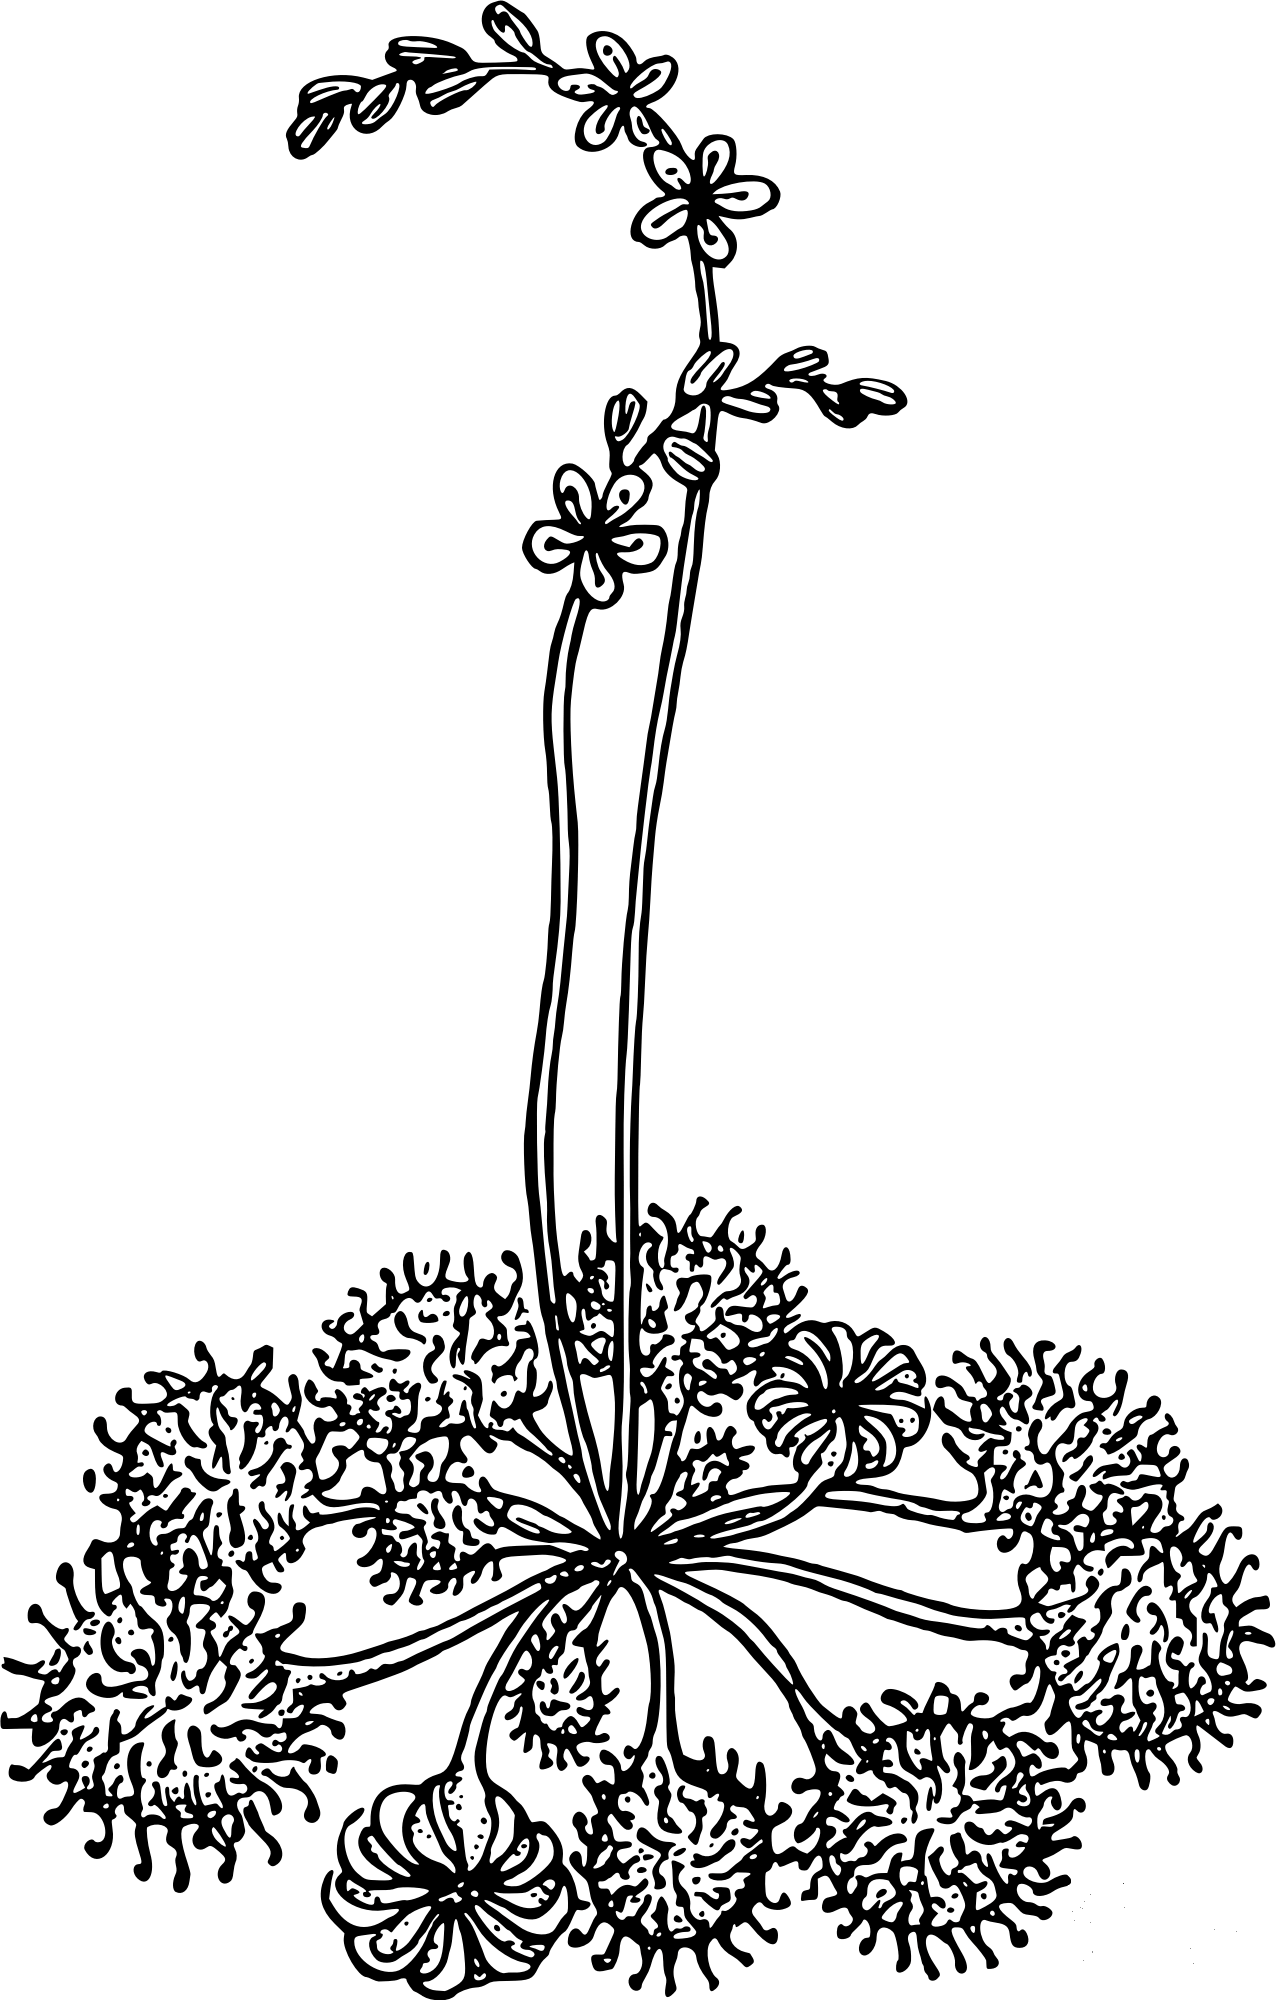 Vintage Sundew coloring page - ColouringPages